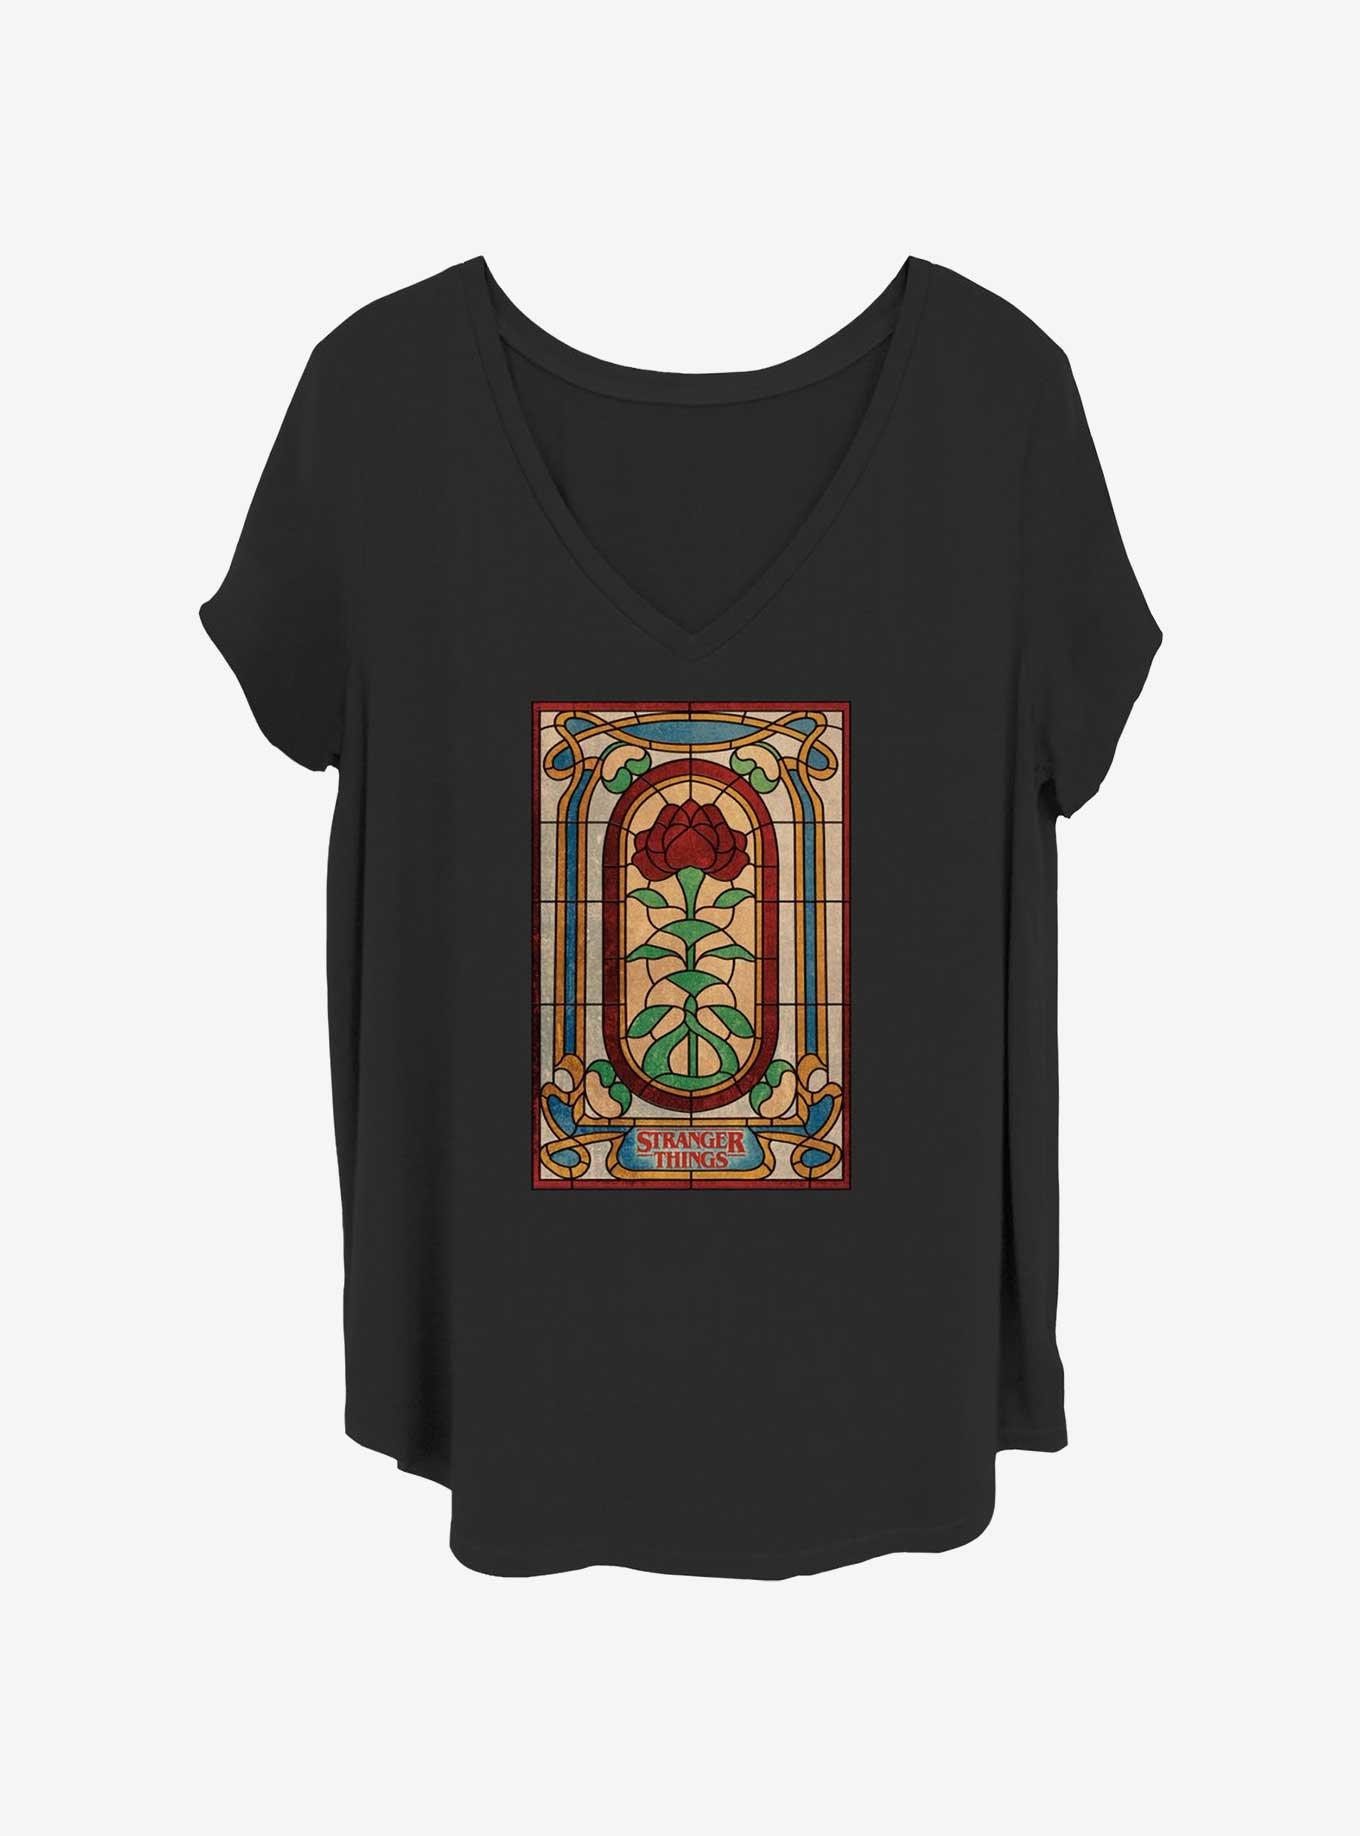 Stranger Things Stained Glass Rose Girls T-Shirt Plus Size, BLACK, hi-res